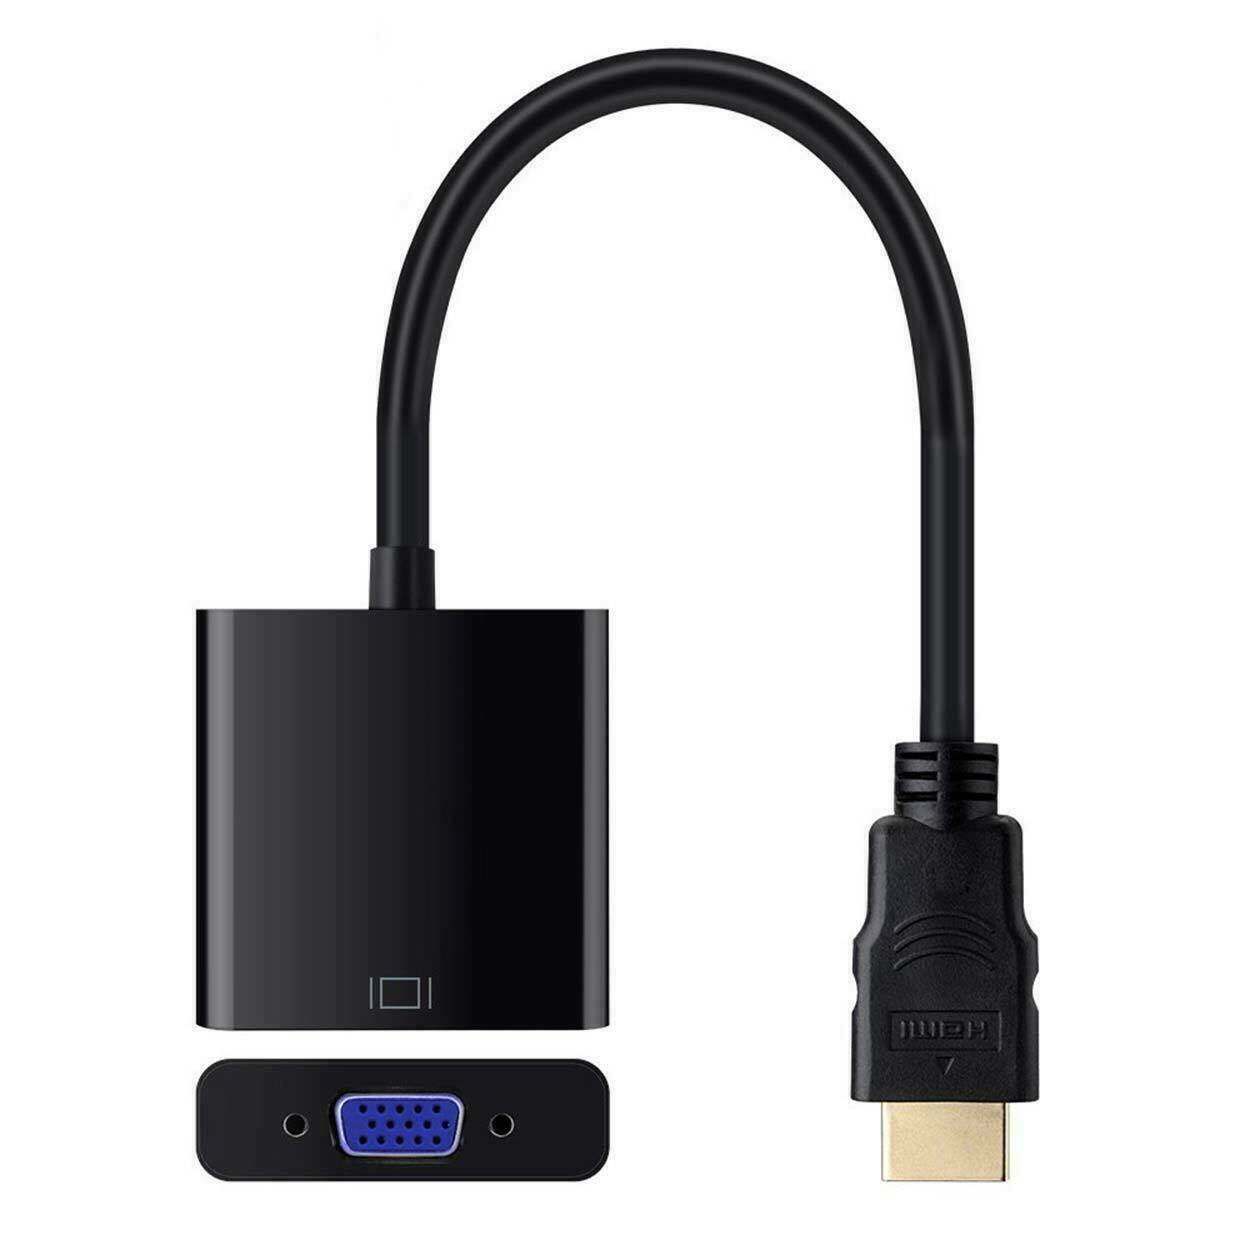 1080P-HDMI-Male-to-VGA-Female-Video-Cable-Cord-Converter-Adapter-For-PC-Monitor-1759442